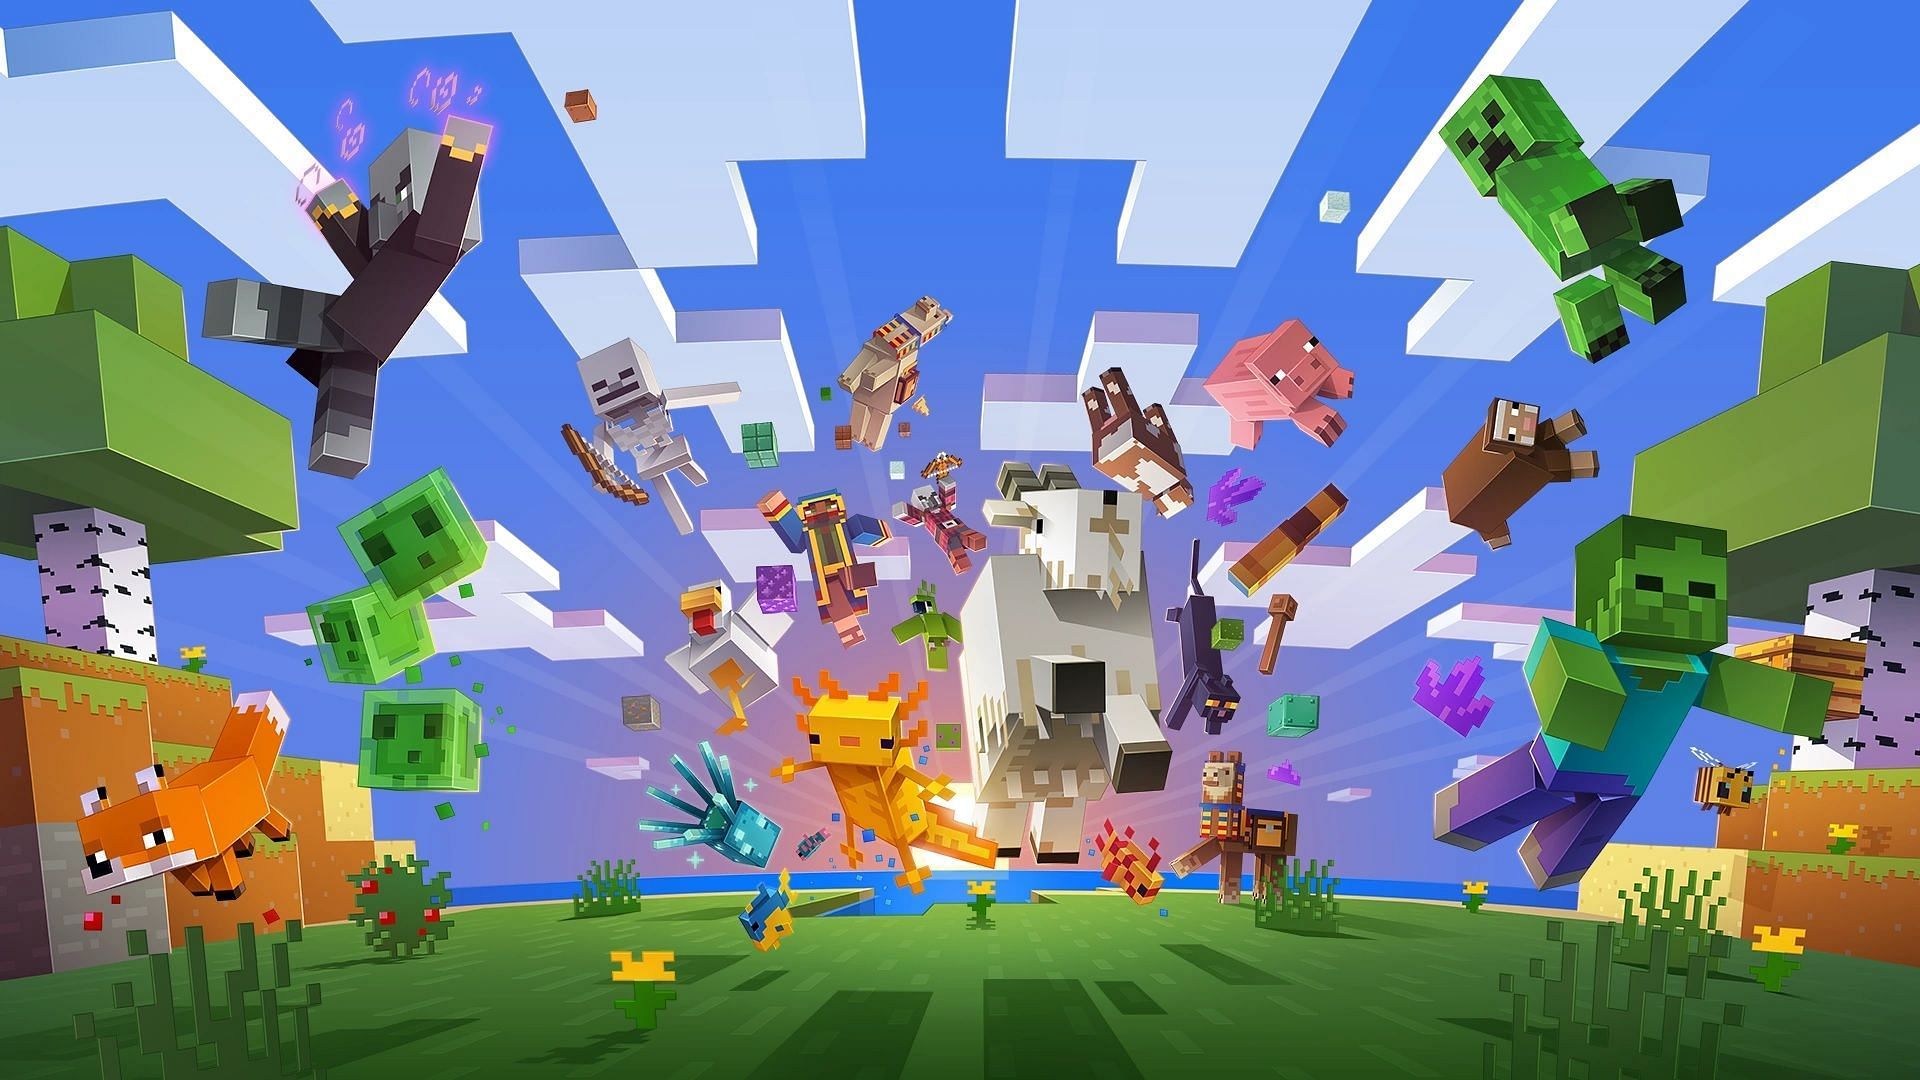 The official art for Minecraft